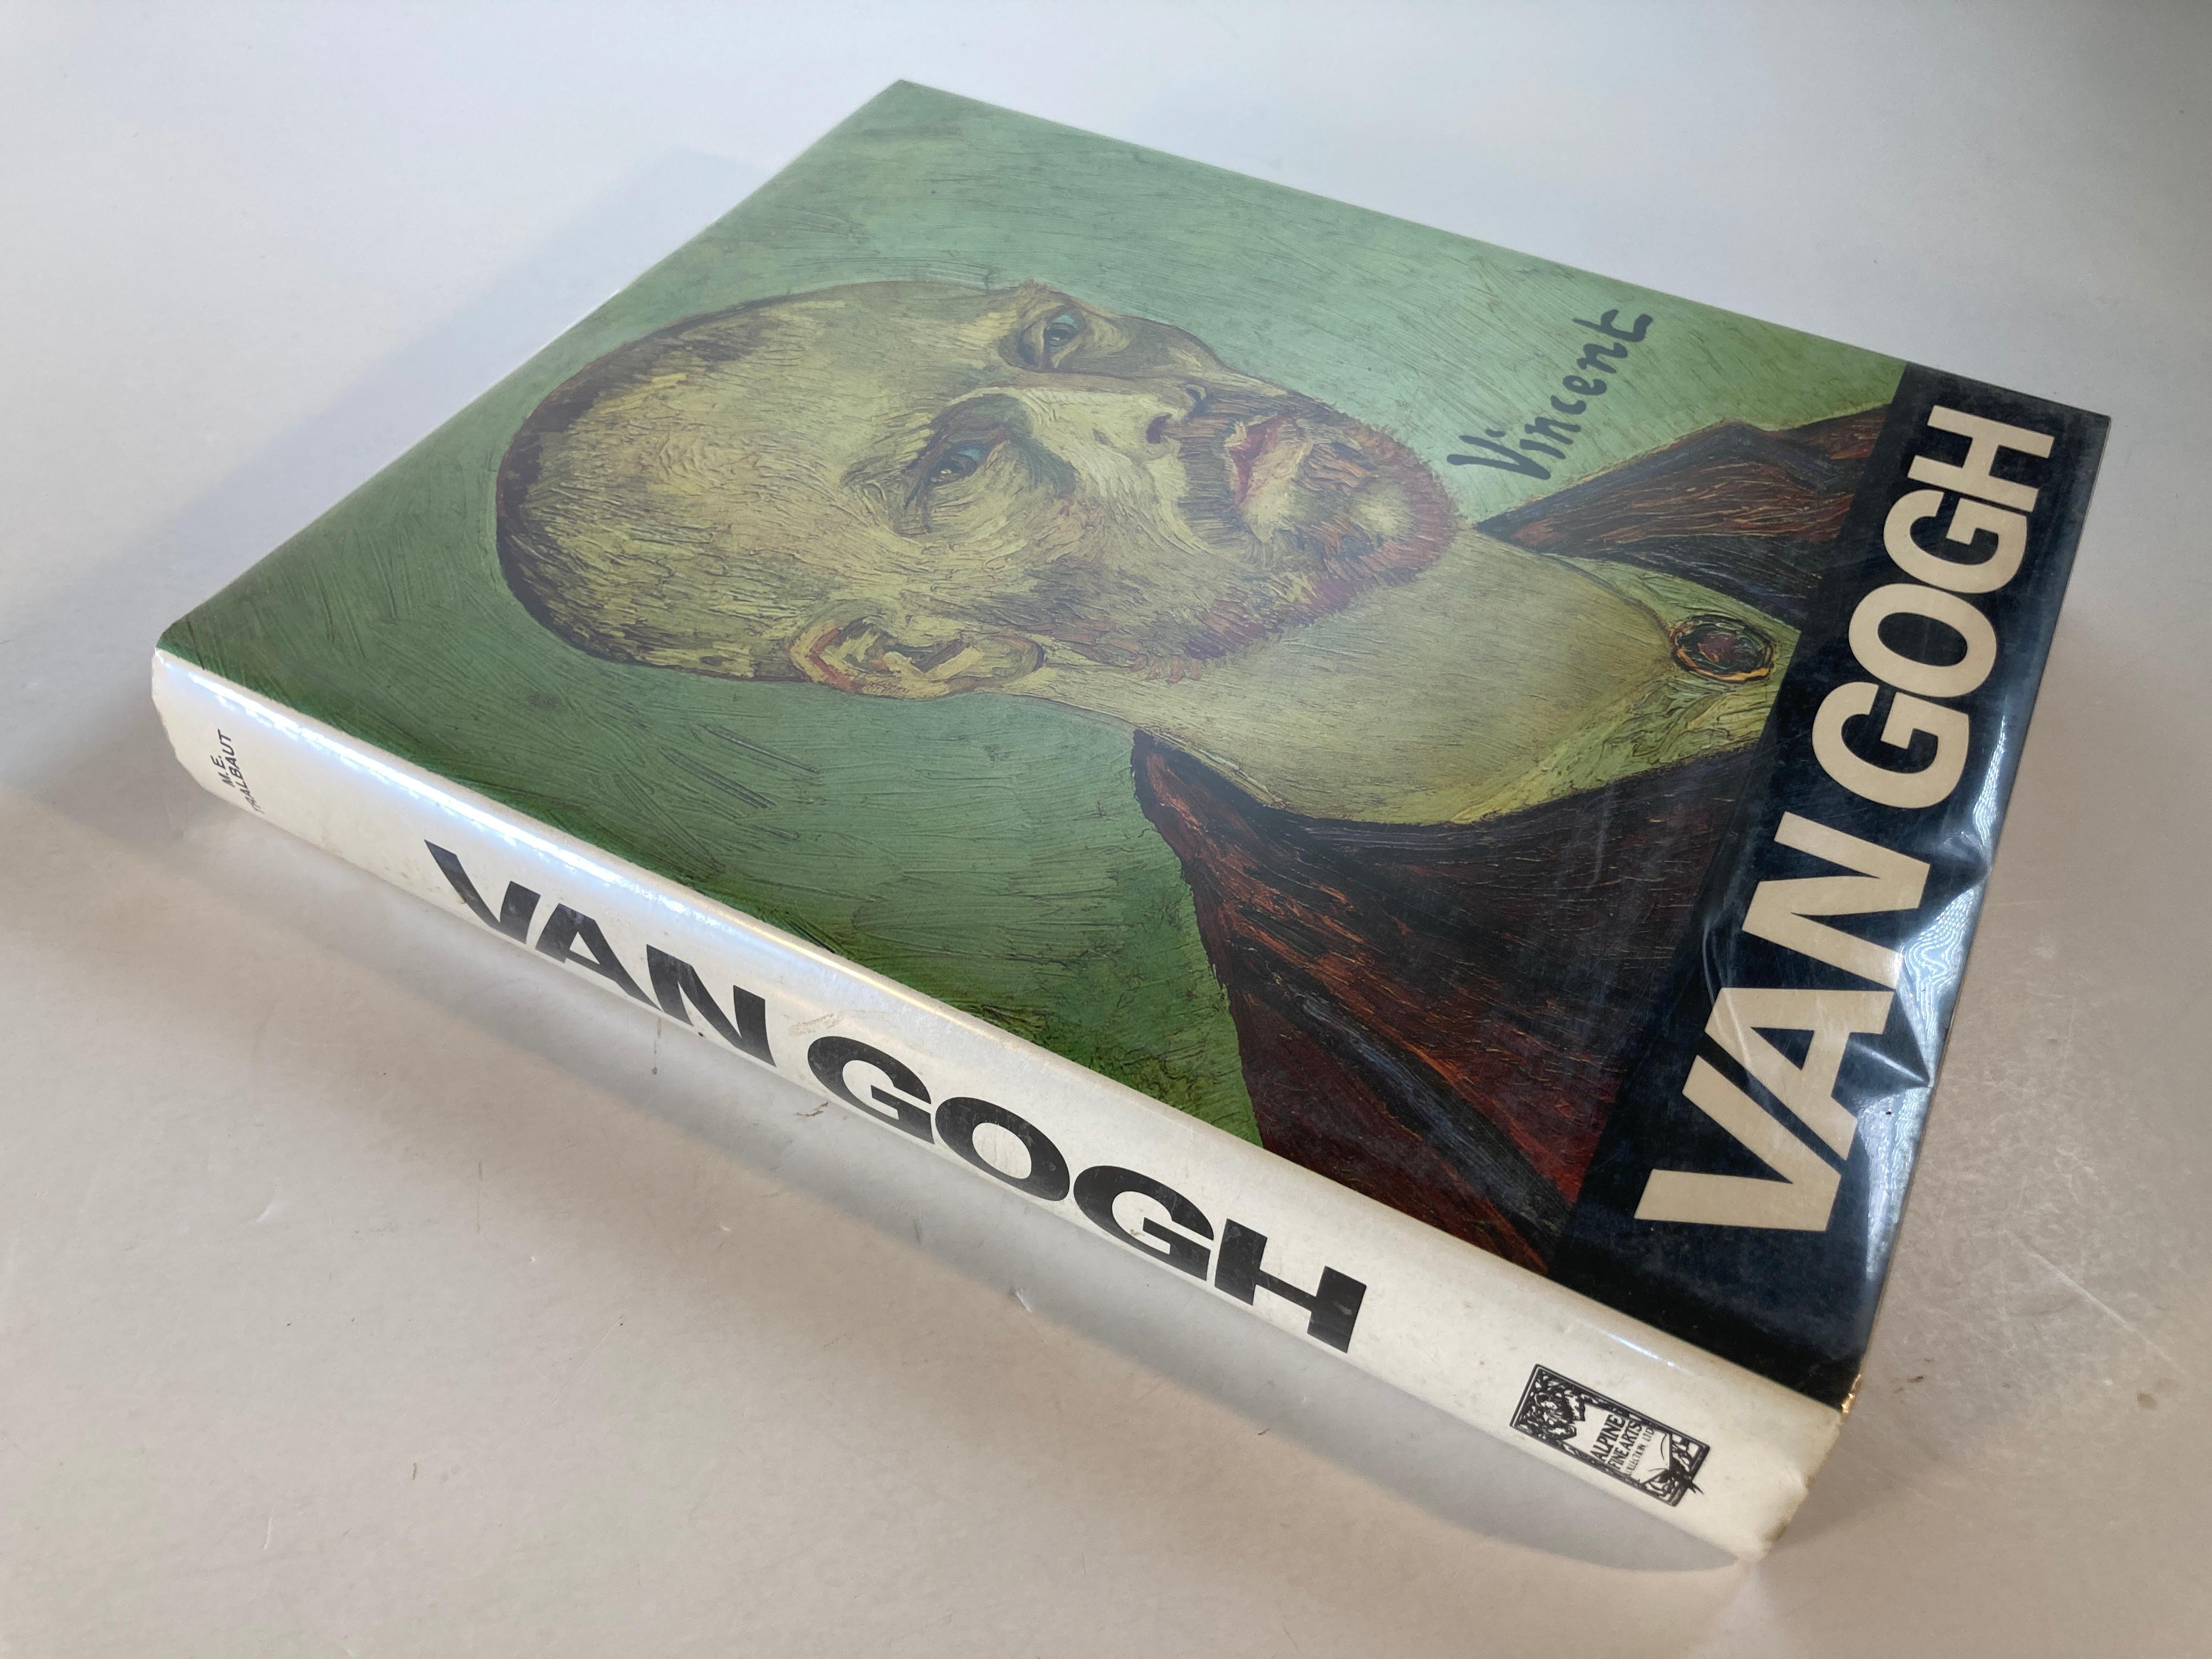 Vincent Van Gogh. Hardcover – January 1, 1969
by Marc Edo Tralbaut (Author)
This is a beautiful large coffee table book. 1st edition 1981.
Vincent Willem van Gogh was a Dutch post-impressionist painter who posthumously became one of the most famous